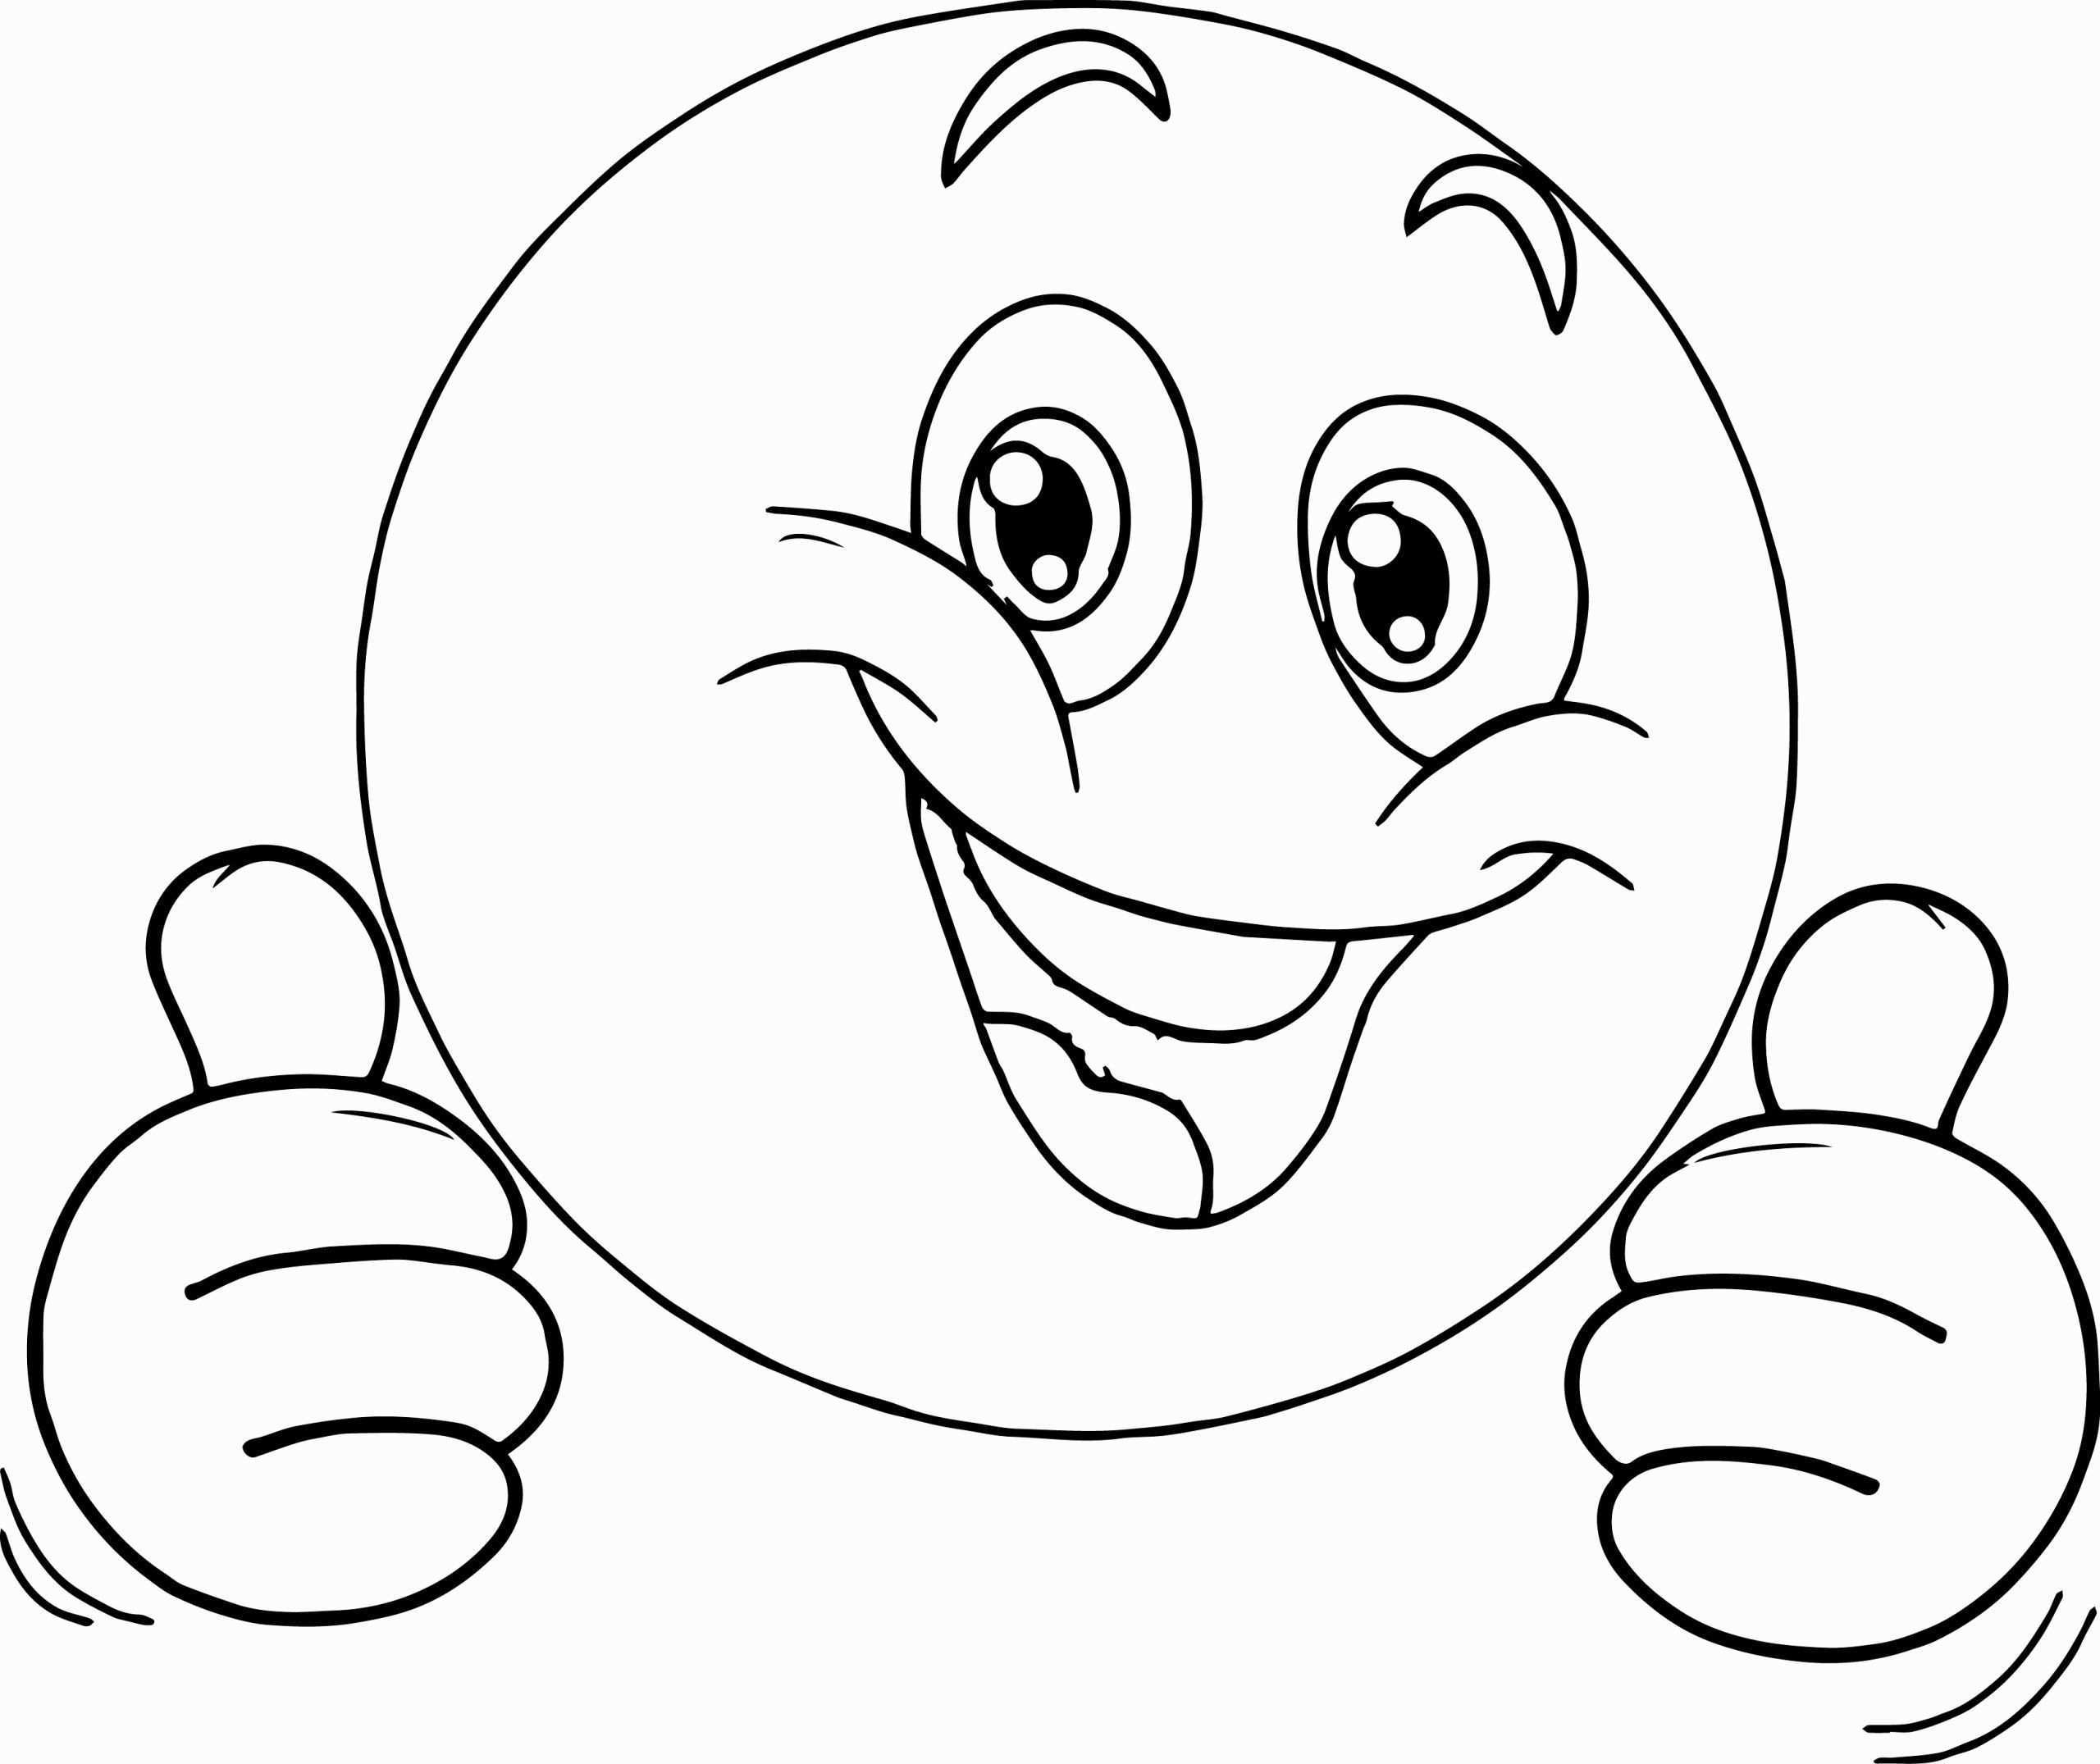 Smiley Face Coloring Page Awesome Very Happy Emoticon Face Coloring Page Emoji Colori